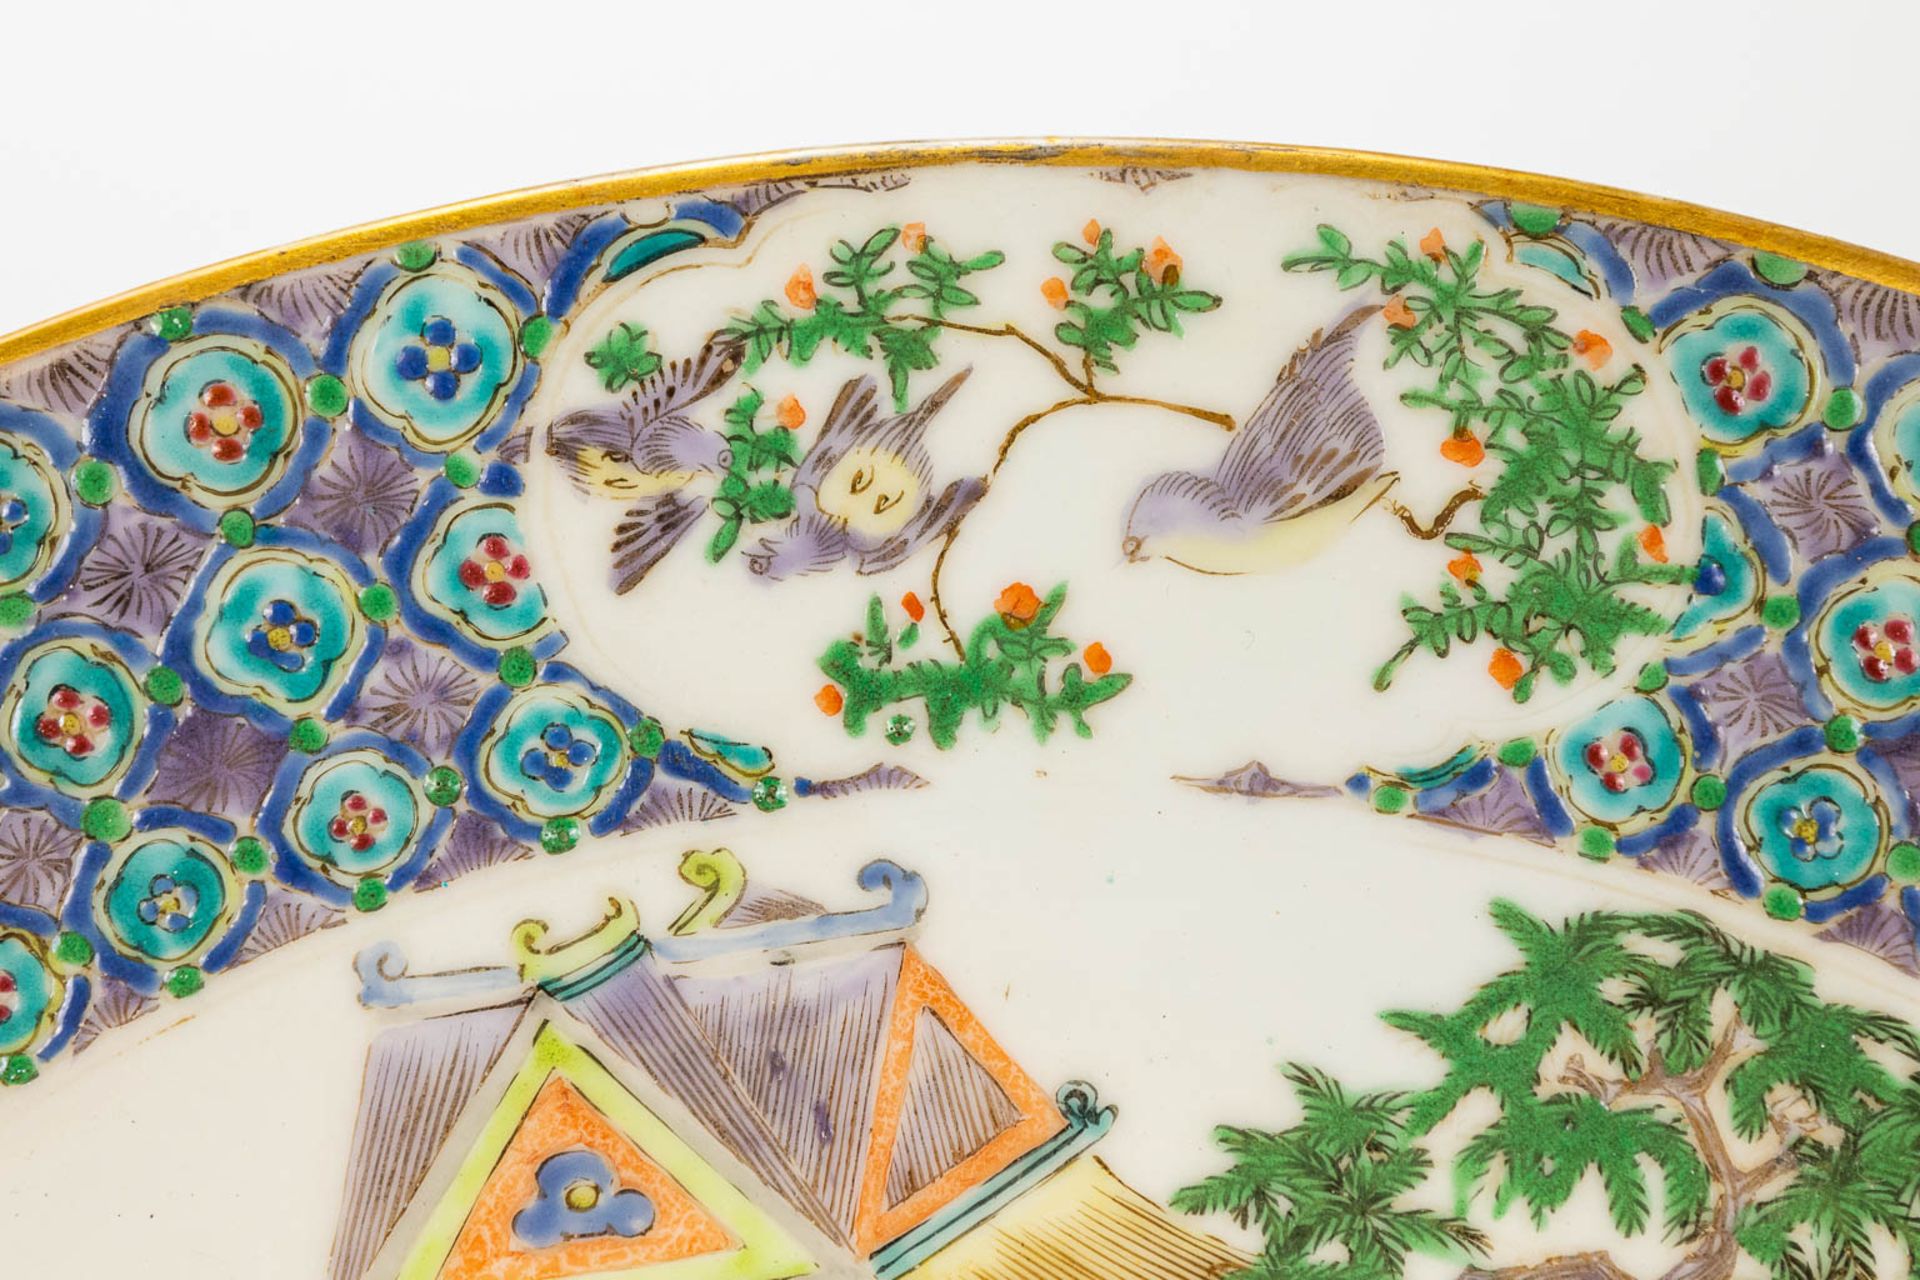 A pair of plates made of Chinese porcelain in Kanton style. 19th century. - Image 18 of 24